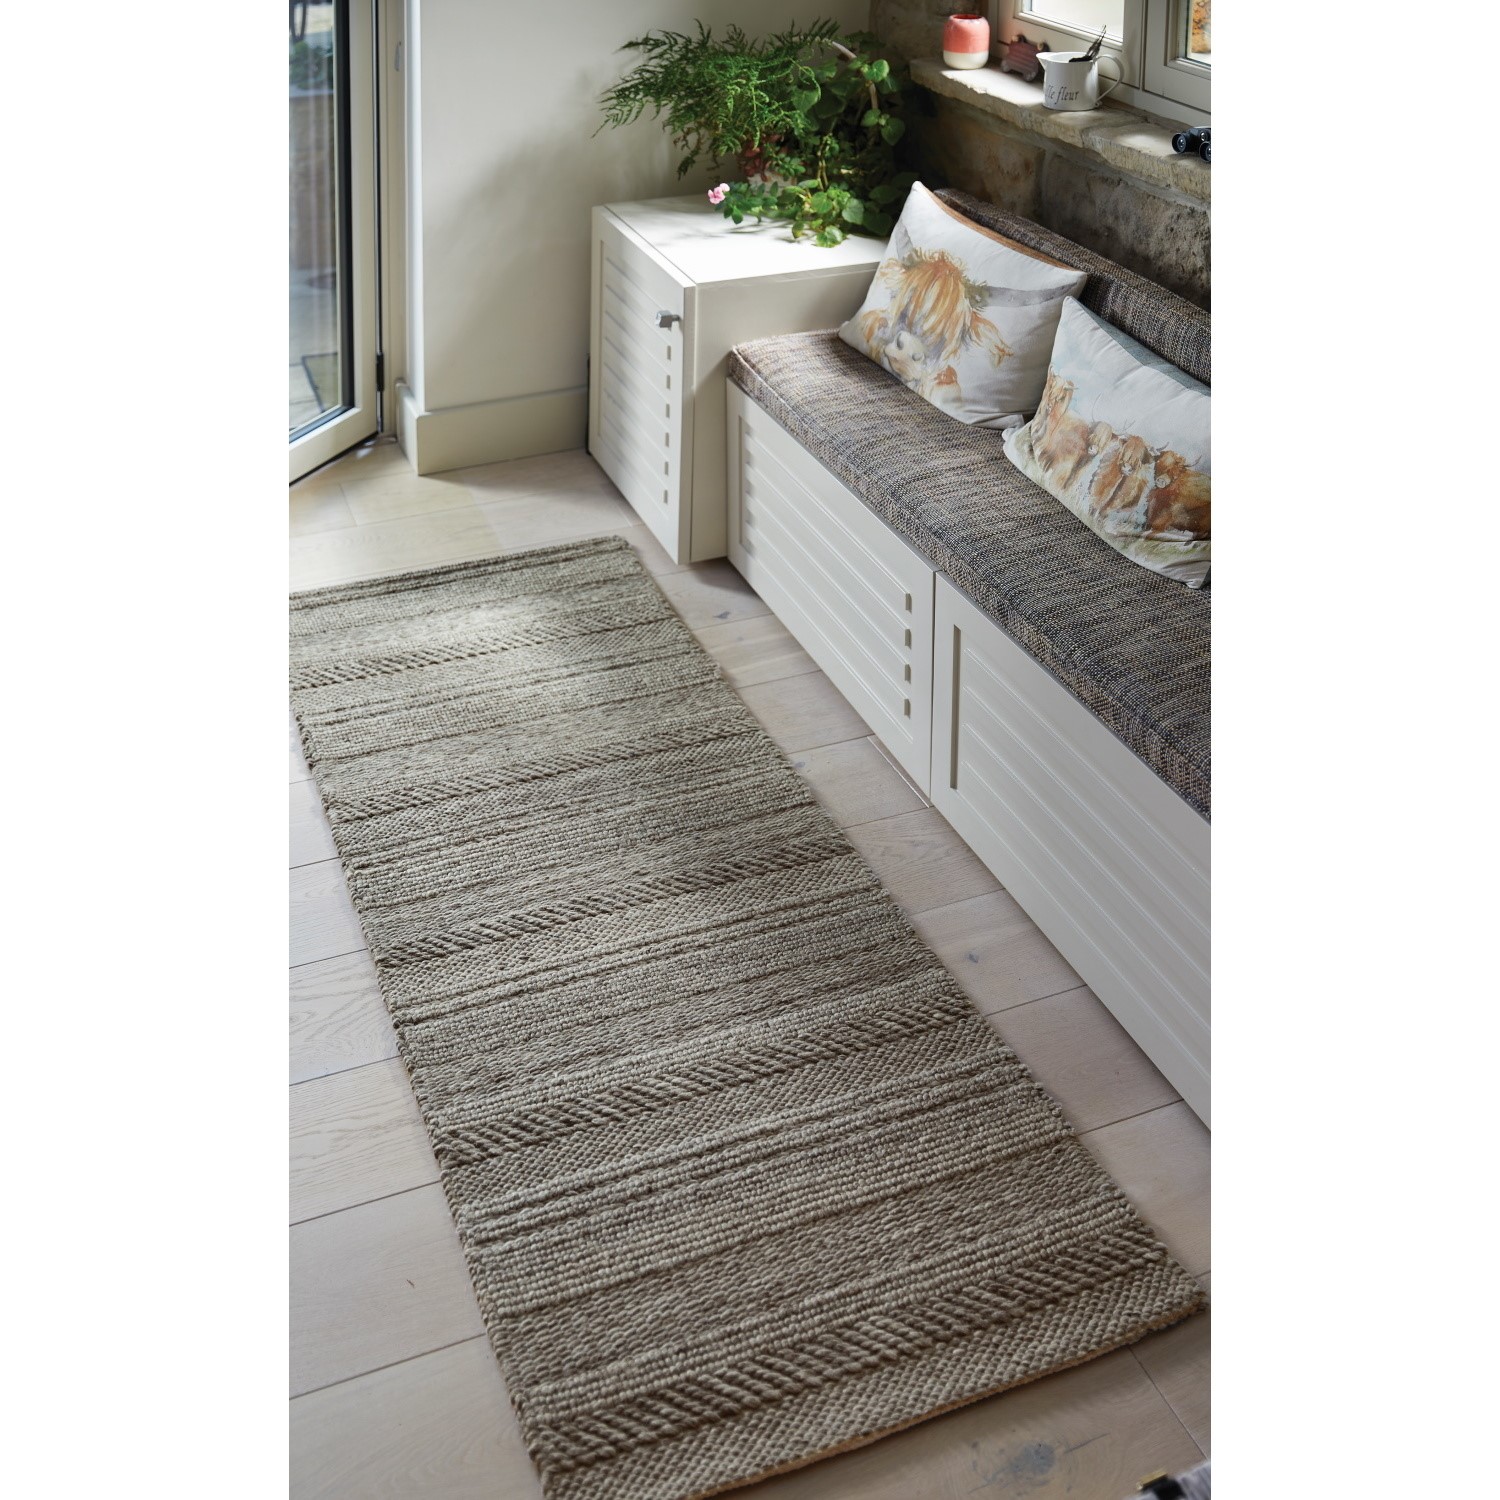 Chunky Knit Runner Rug in Natural Grey - 67x200cm - Ripley - Furniture123